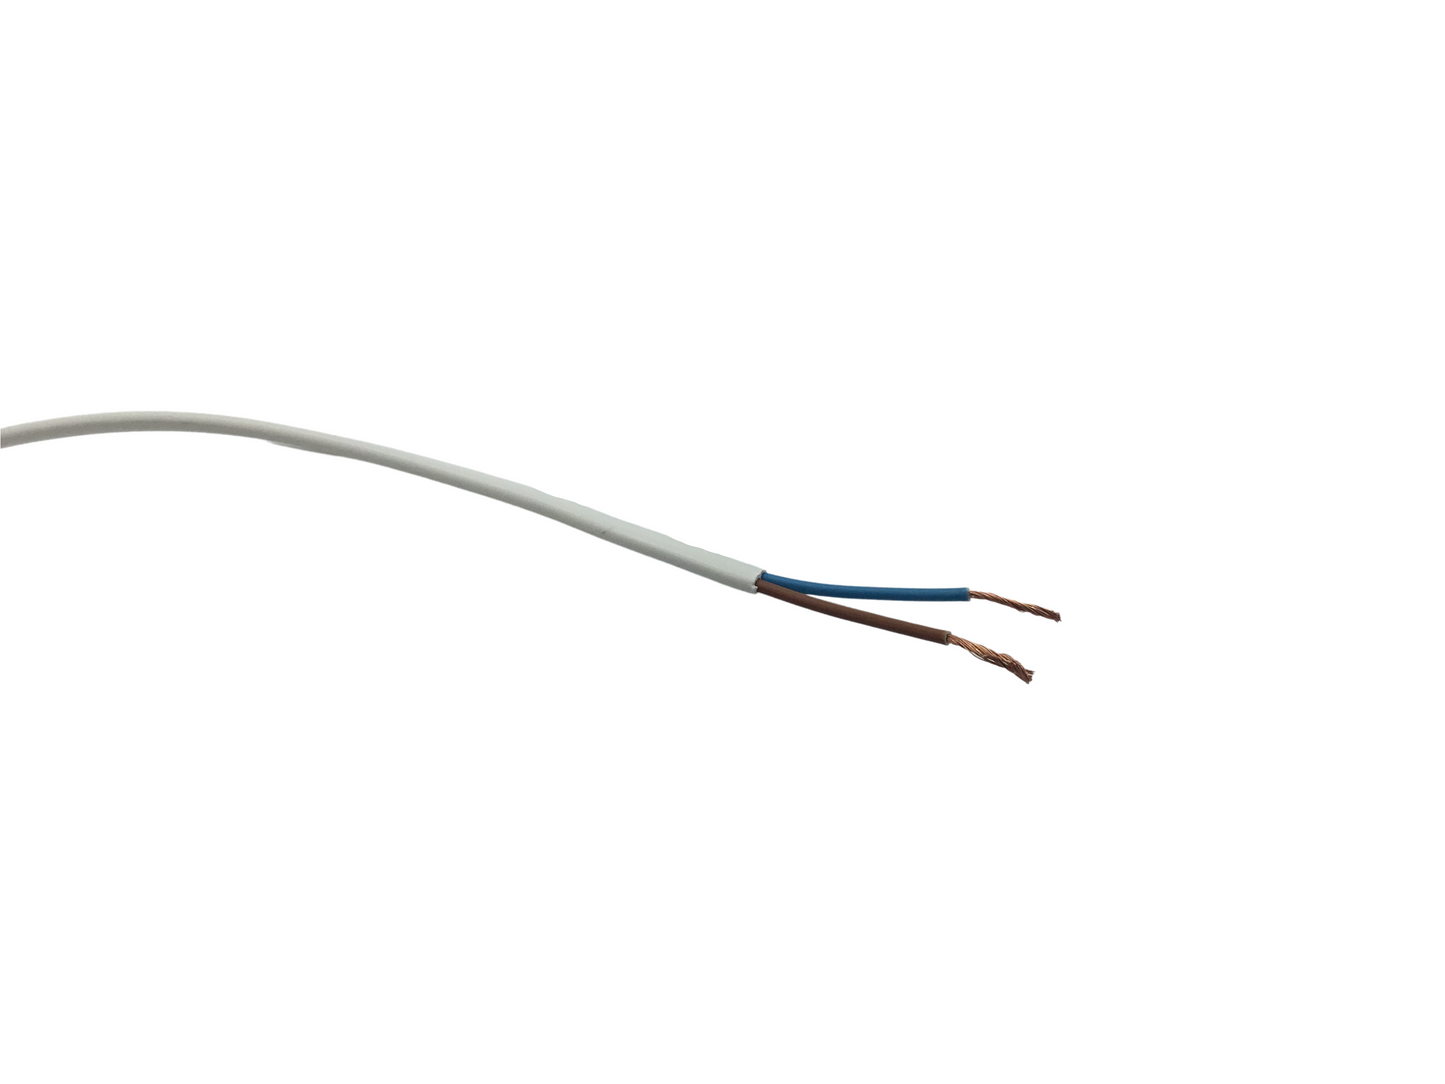 Bare End IEC C7 Straight Mains Lead - White